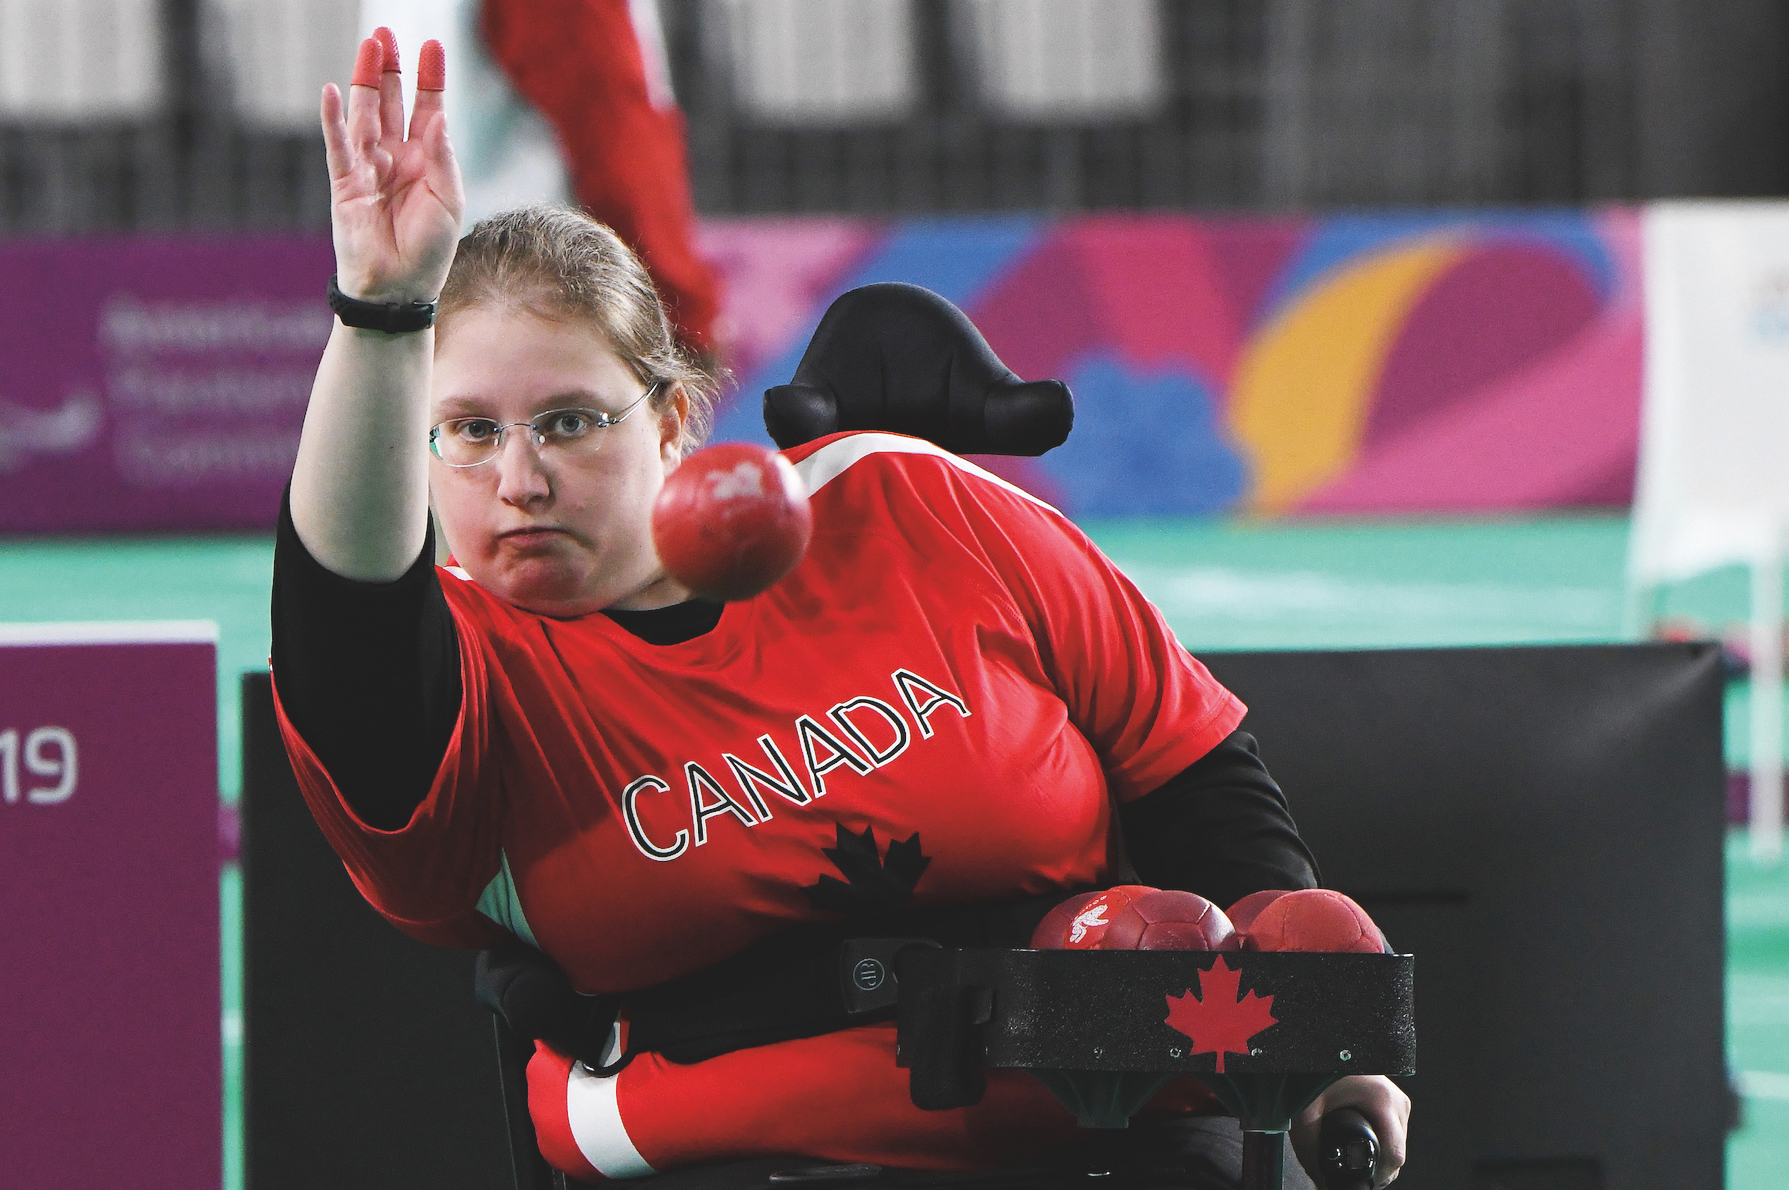 Paralympian Alison Levine in a red Canada shirt